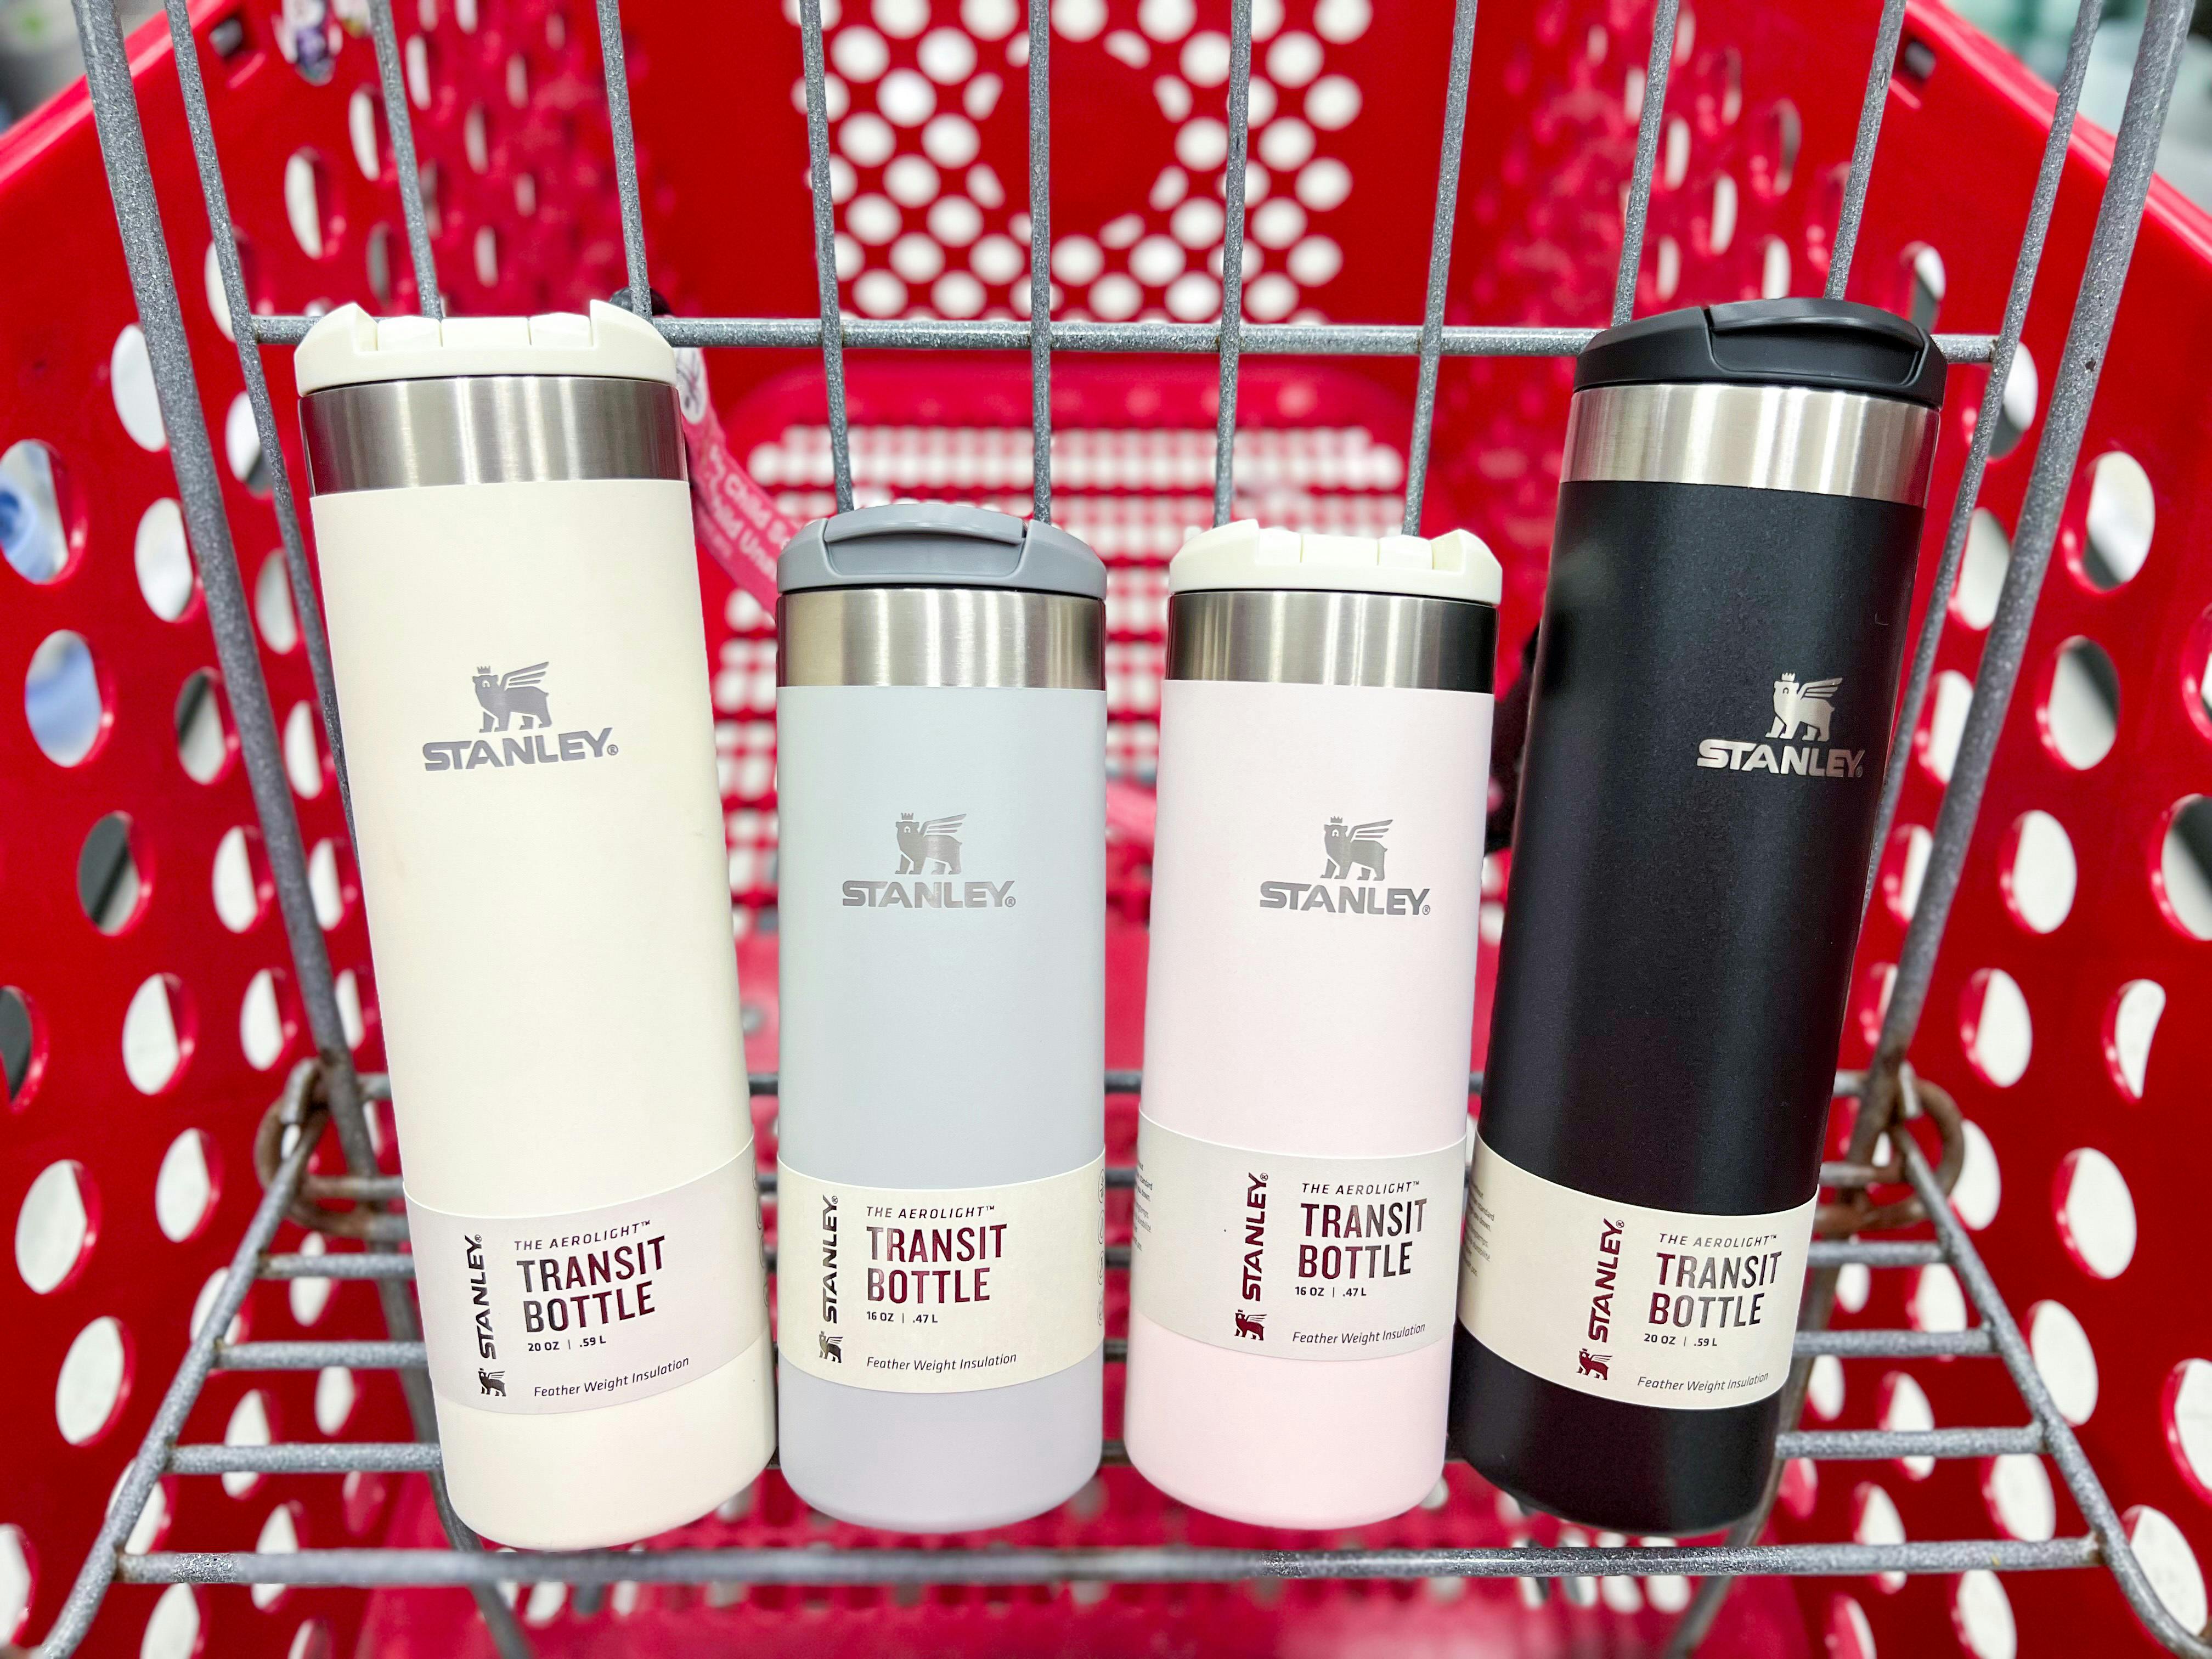 Target Has 6 New Stanley Cup Colors in Collaboration with Joanna